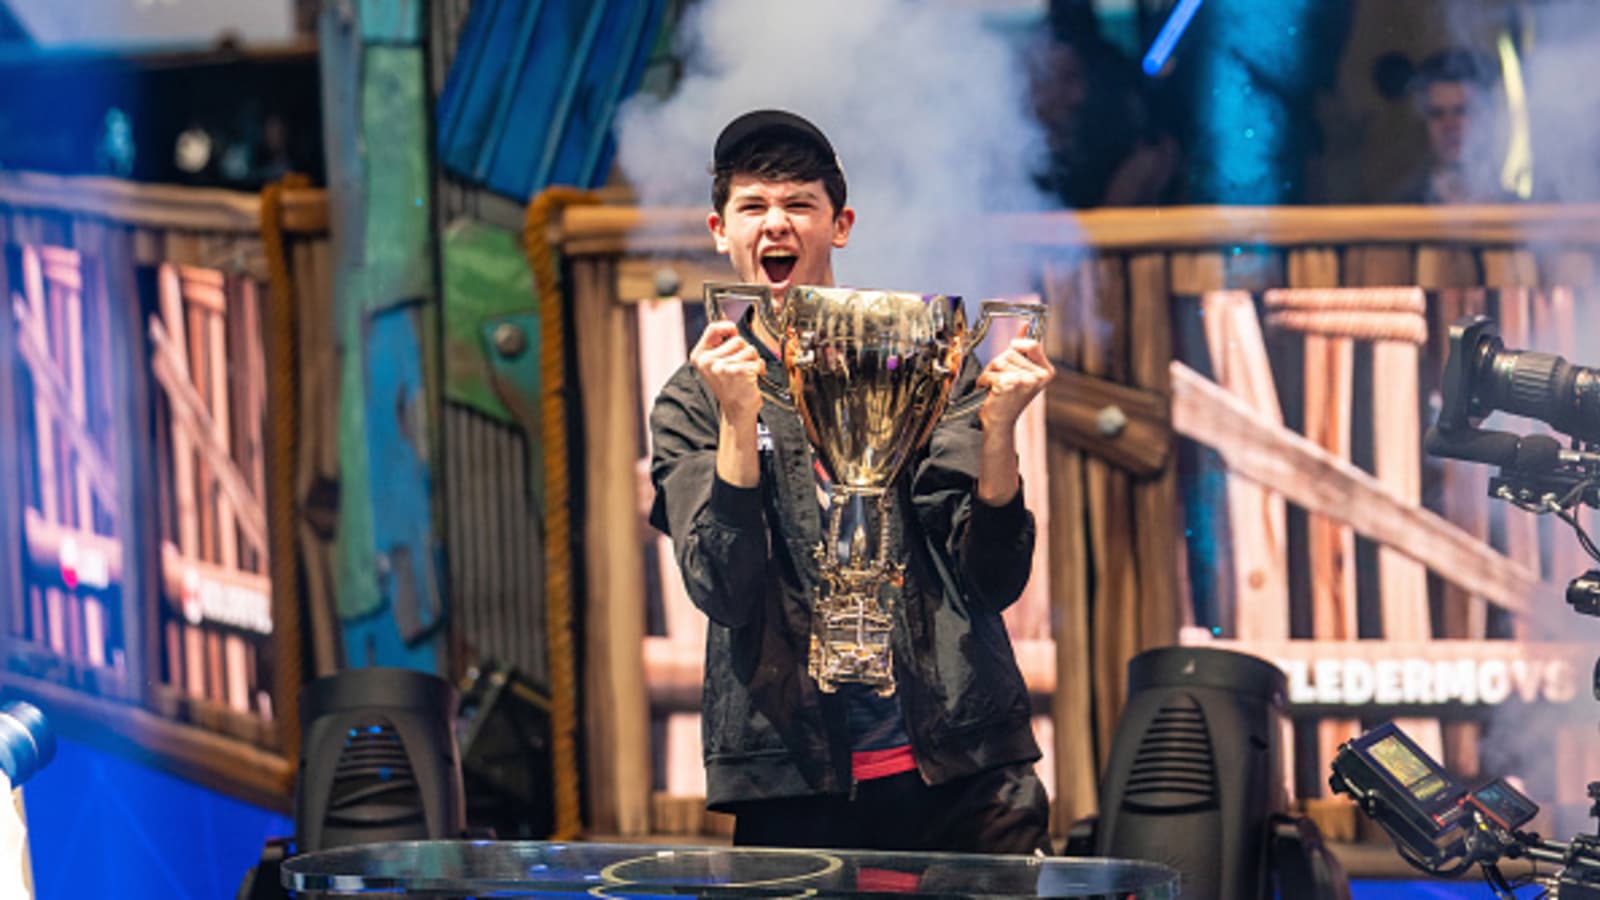 Online Gaming Tournaments and Esports For Kids - Tech Revolution